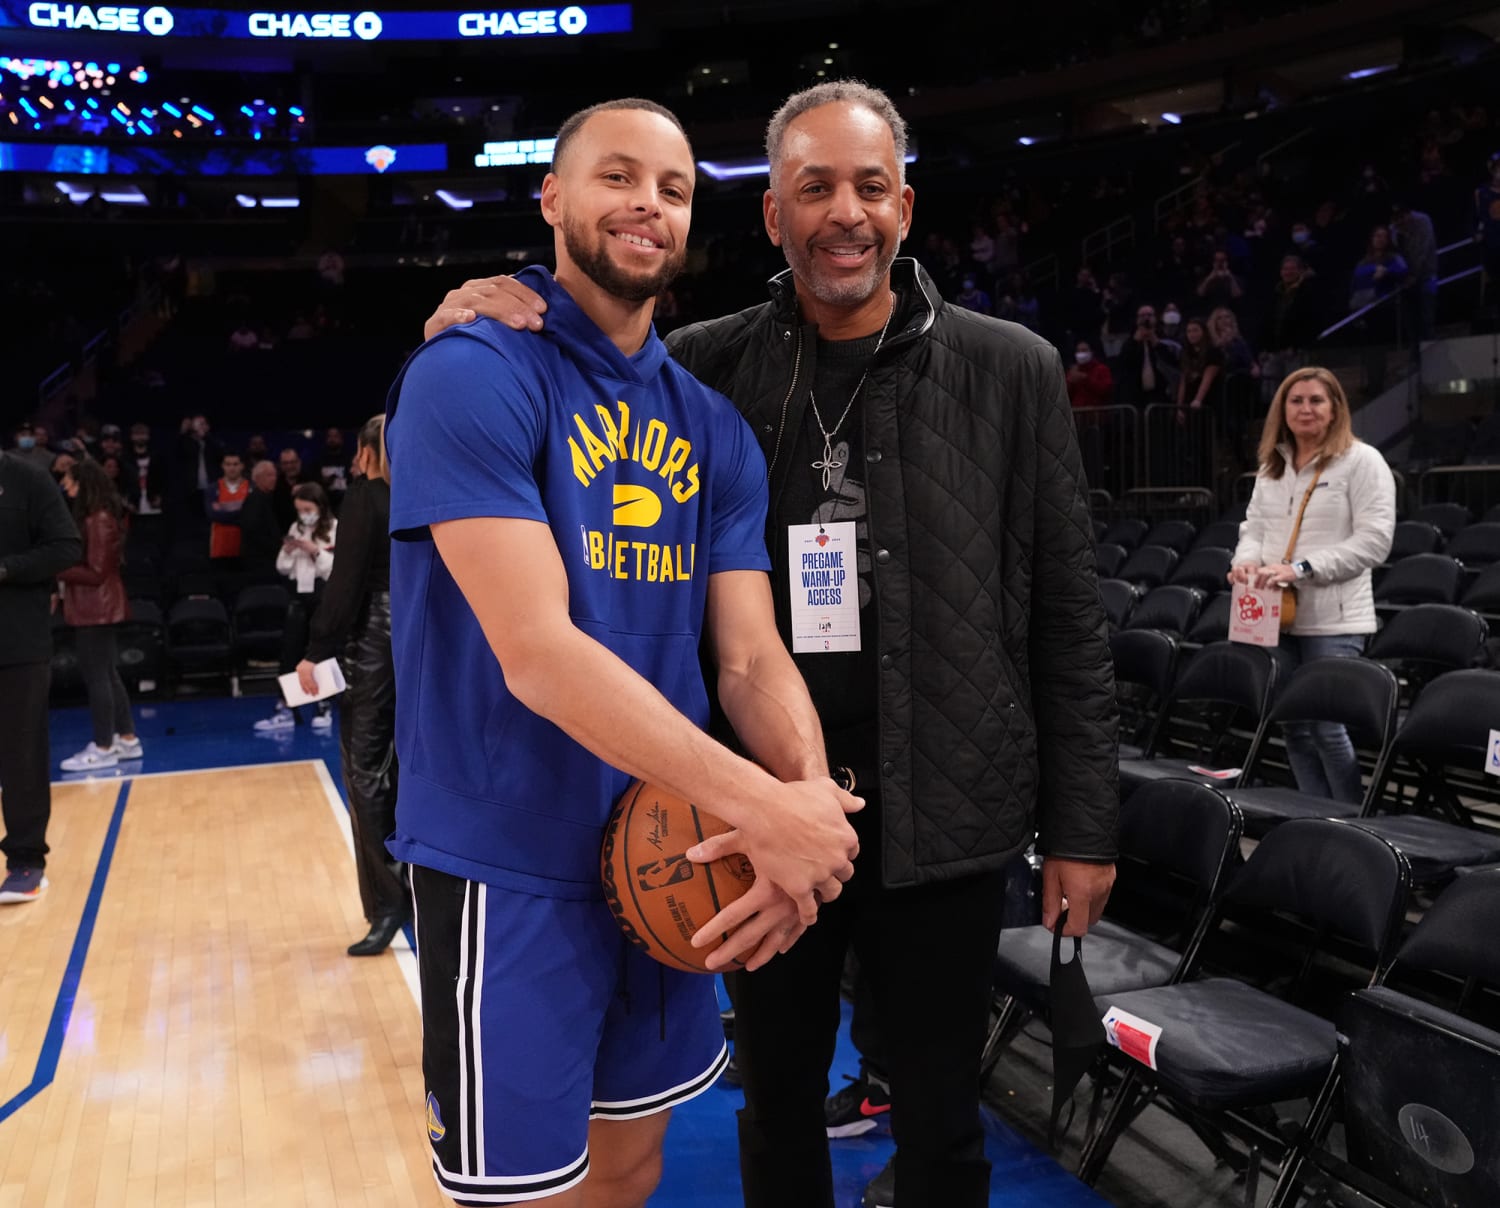 Dell Curry, father of Steph Curry, during his final NBA season